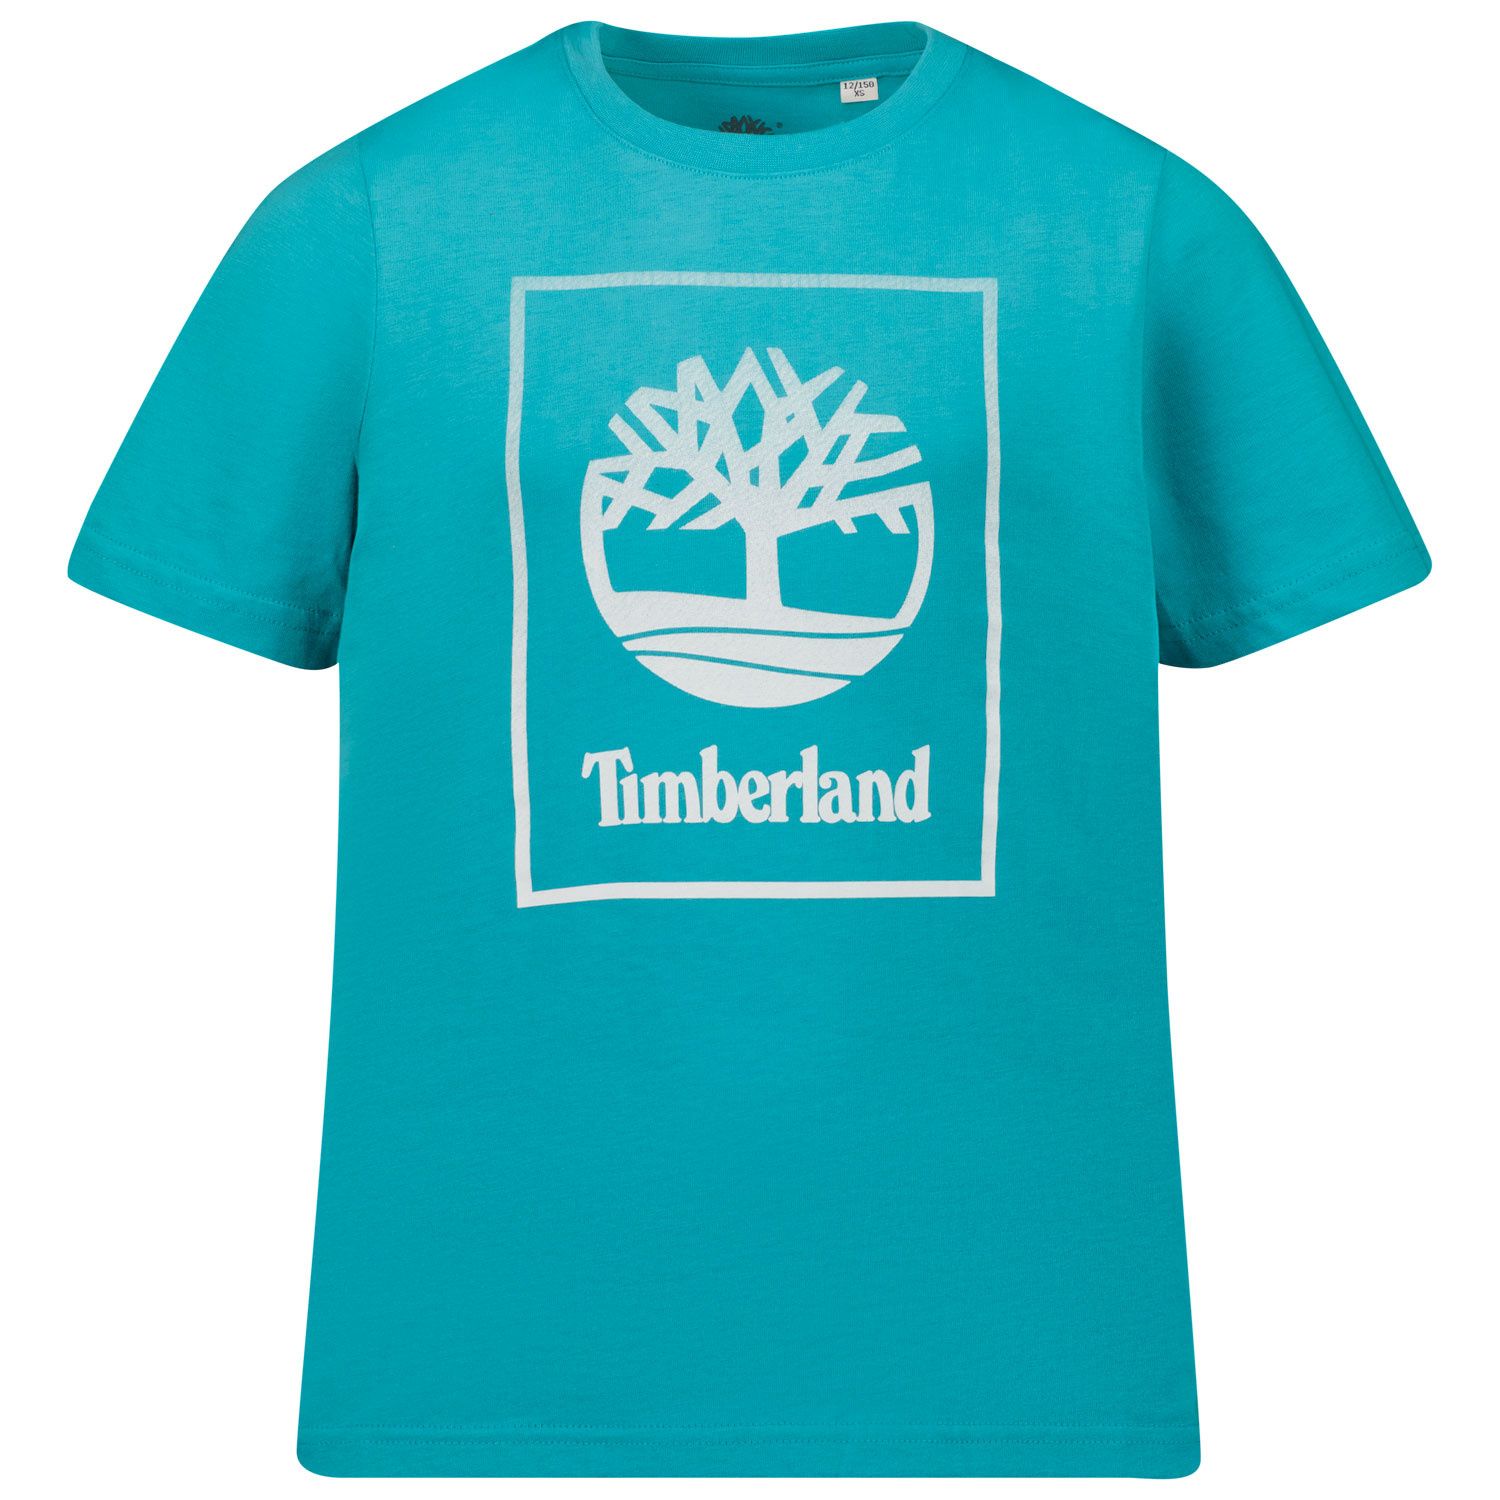 Picture of Timberland T25S83 kids t-shirt turquoise